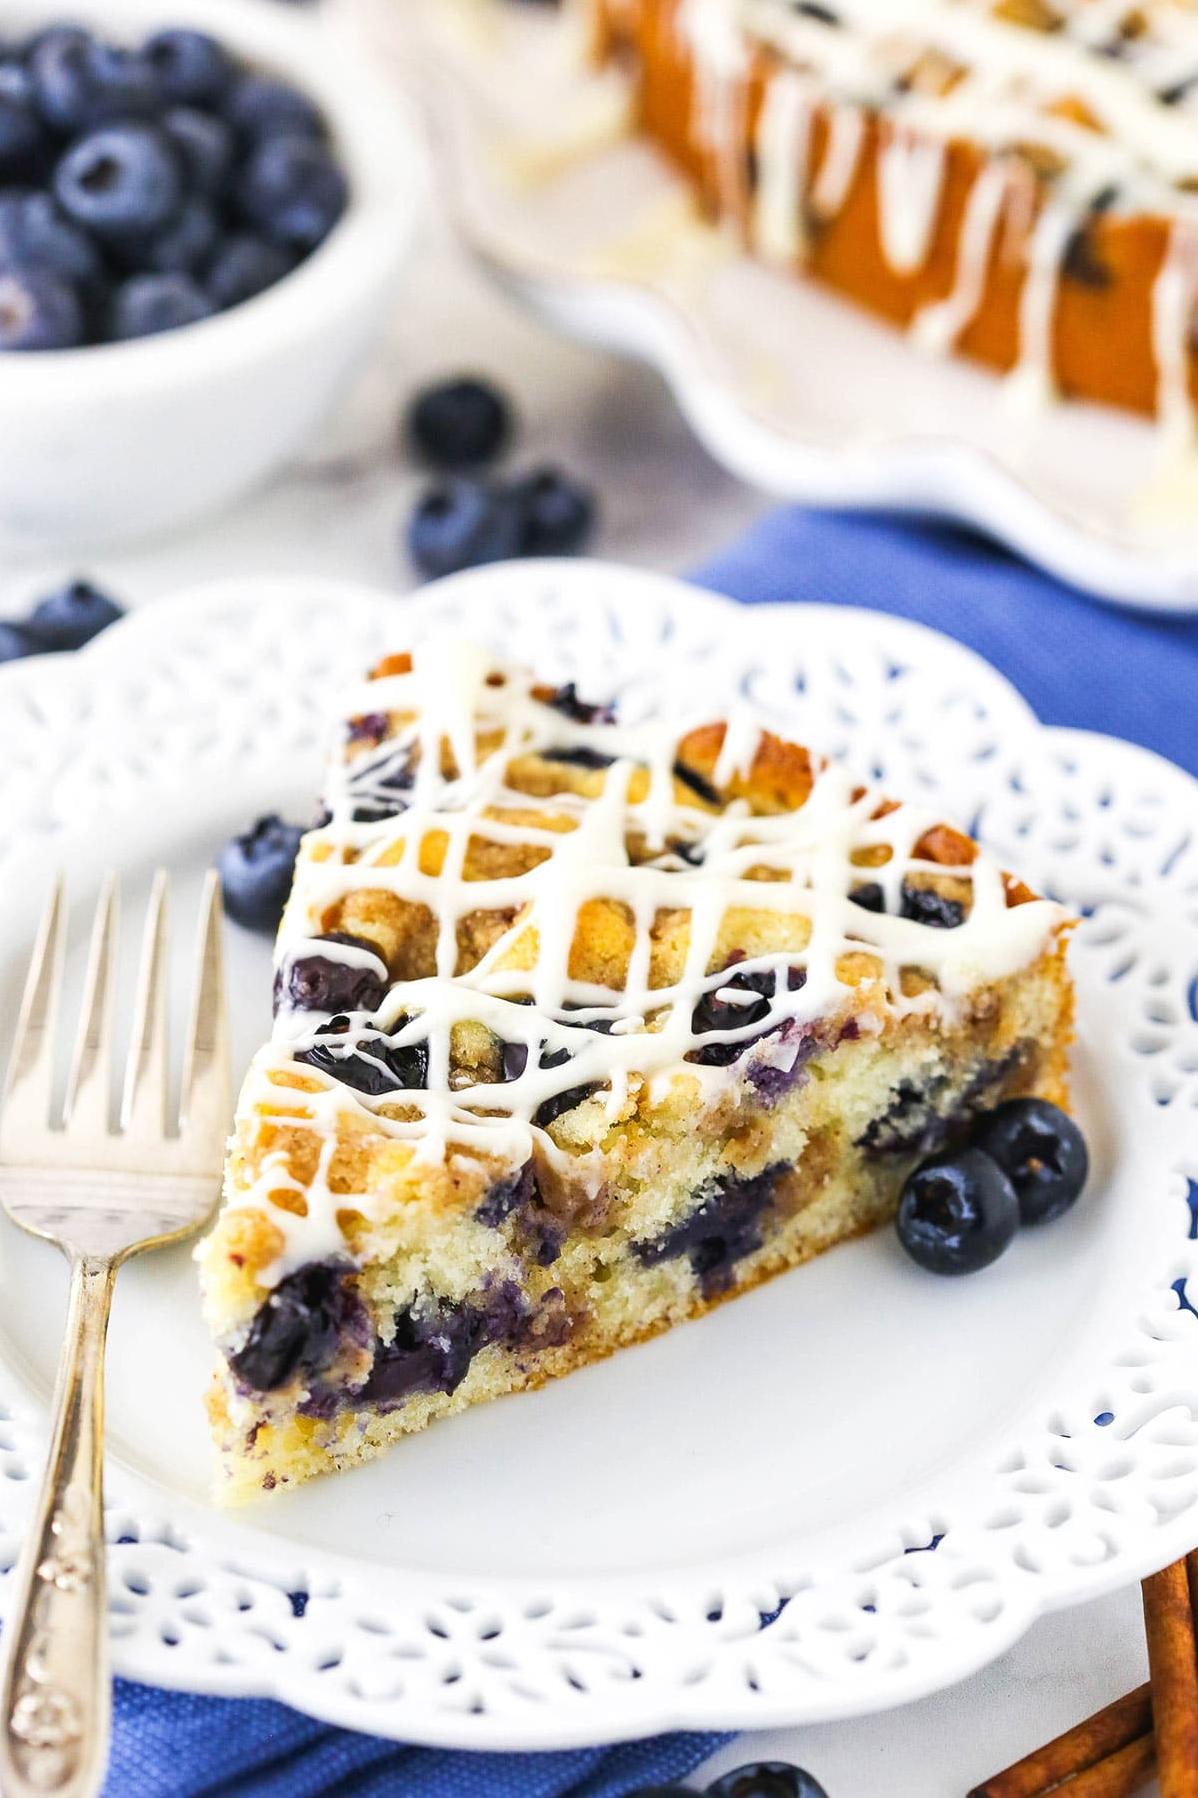  Craving coffee cake but also trying to be healthy? Blueberries are known for their antioxidants benefits. 😉